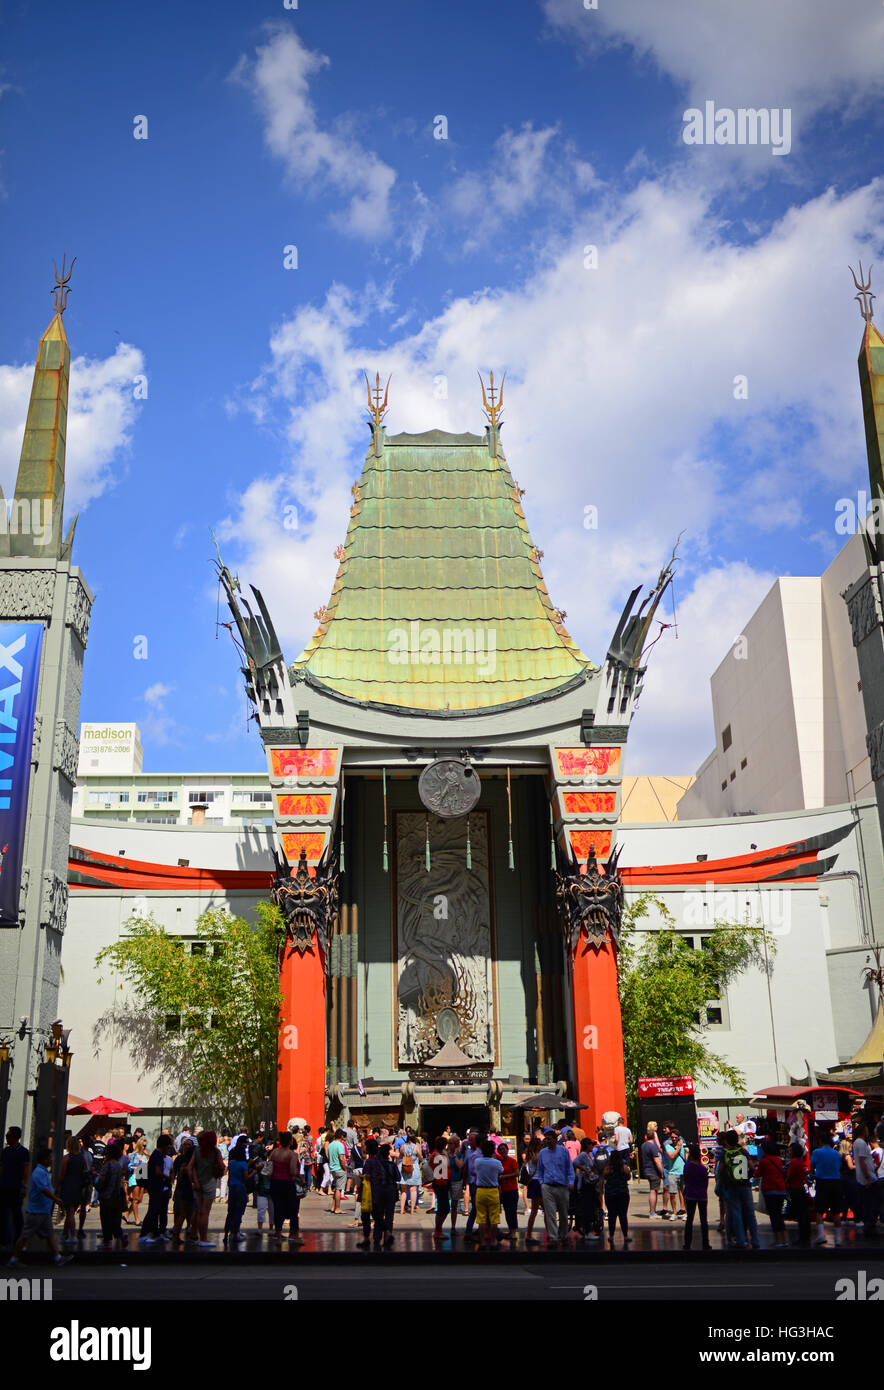 Grauman's Chinese Theatre at Hollywood Boulevard, Los Angeles. Stock Photo